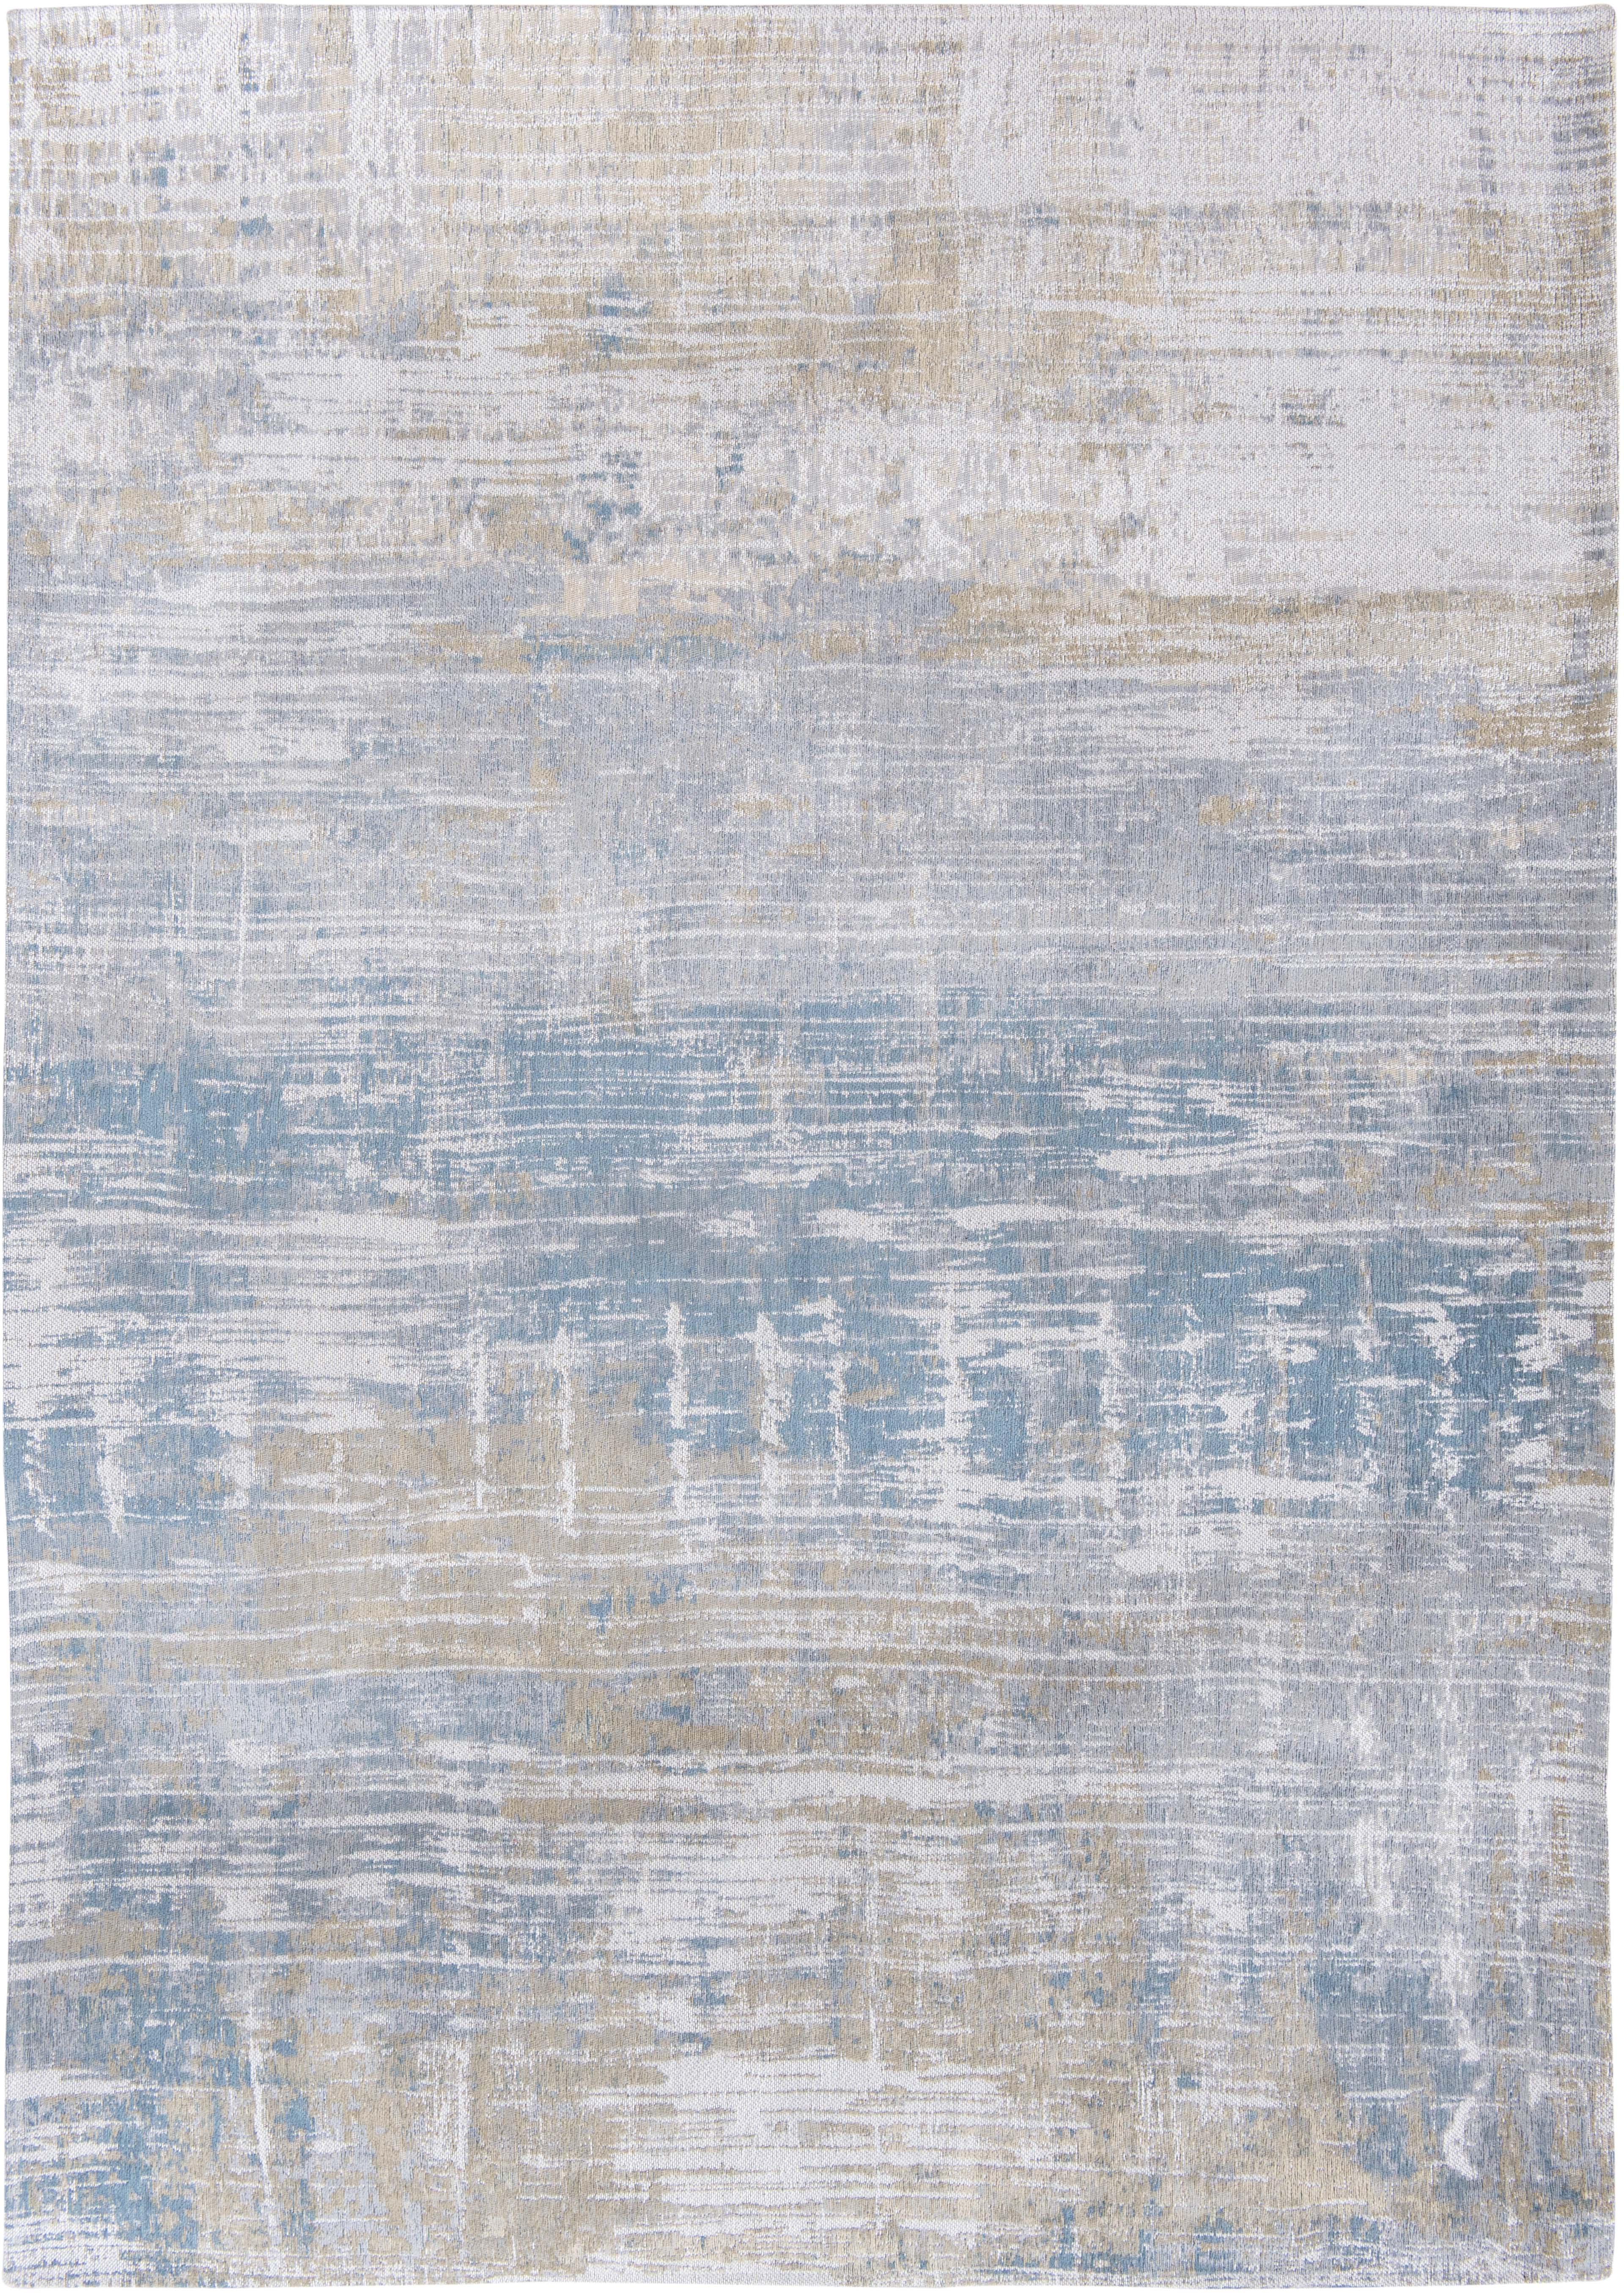 Flatweave runner rug with abstract stripe design in blue, grey and beige